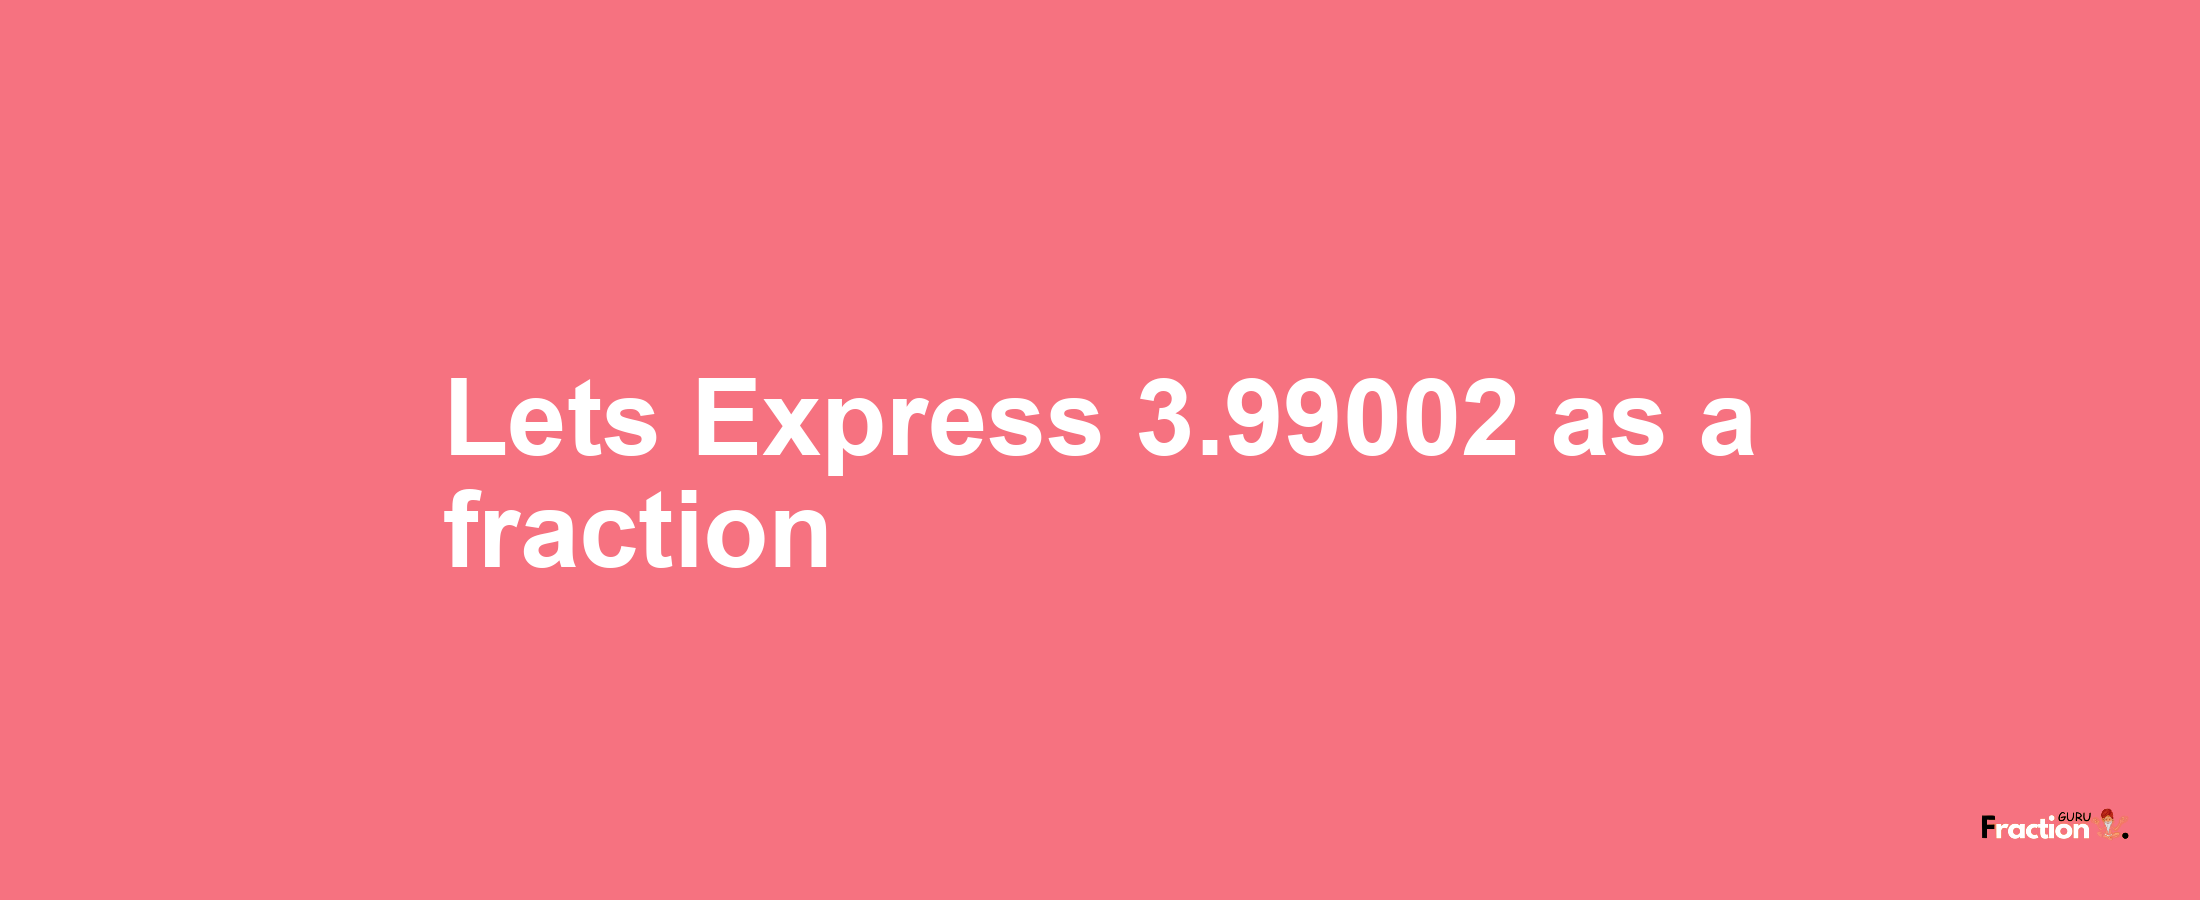 Lets Express 3.99002 as afraction